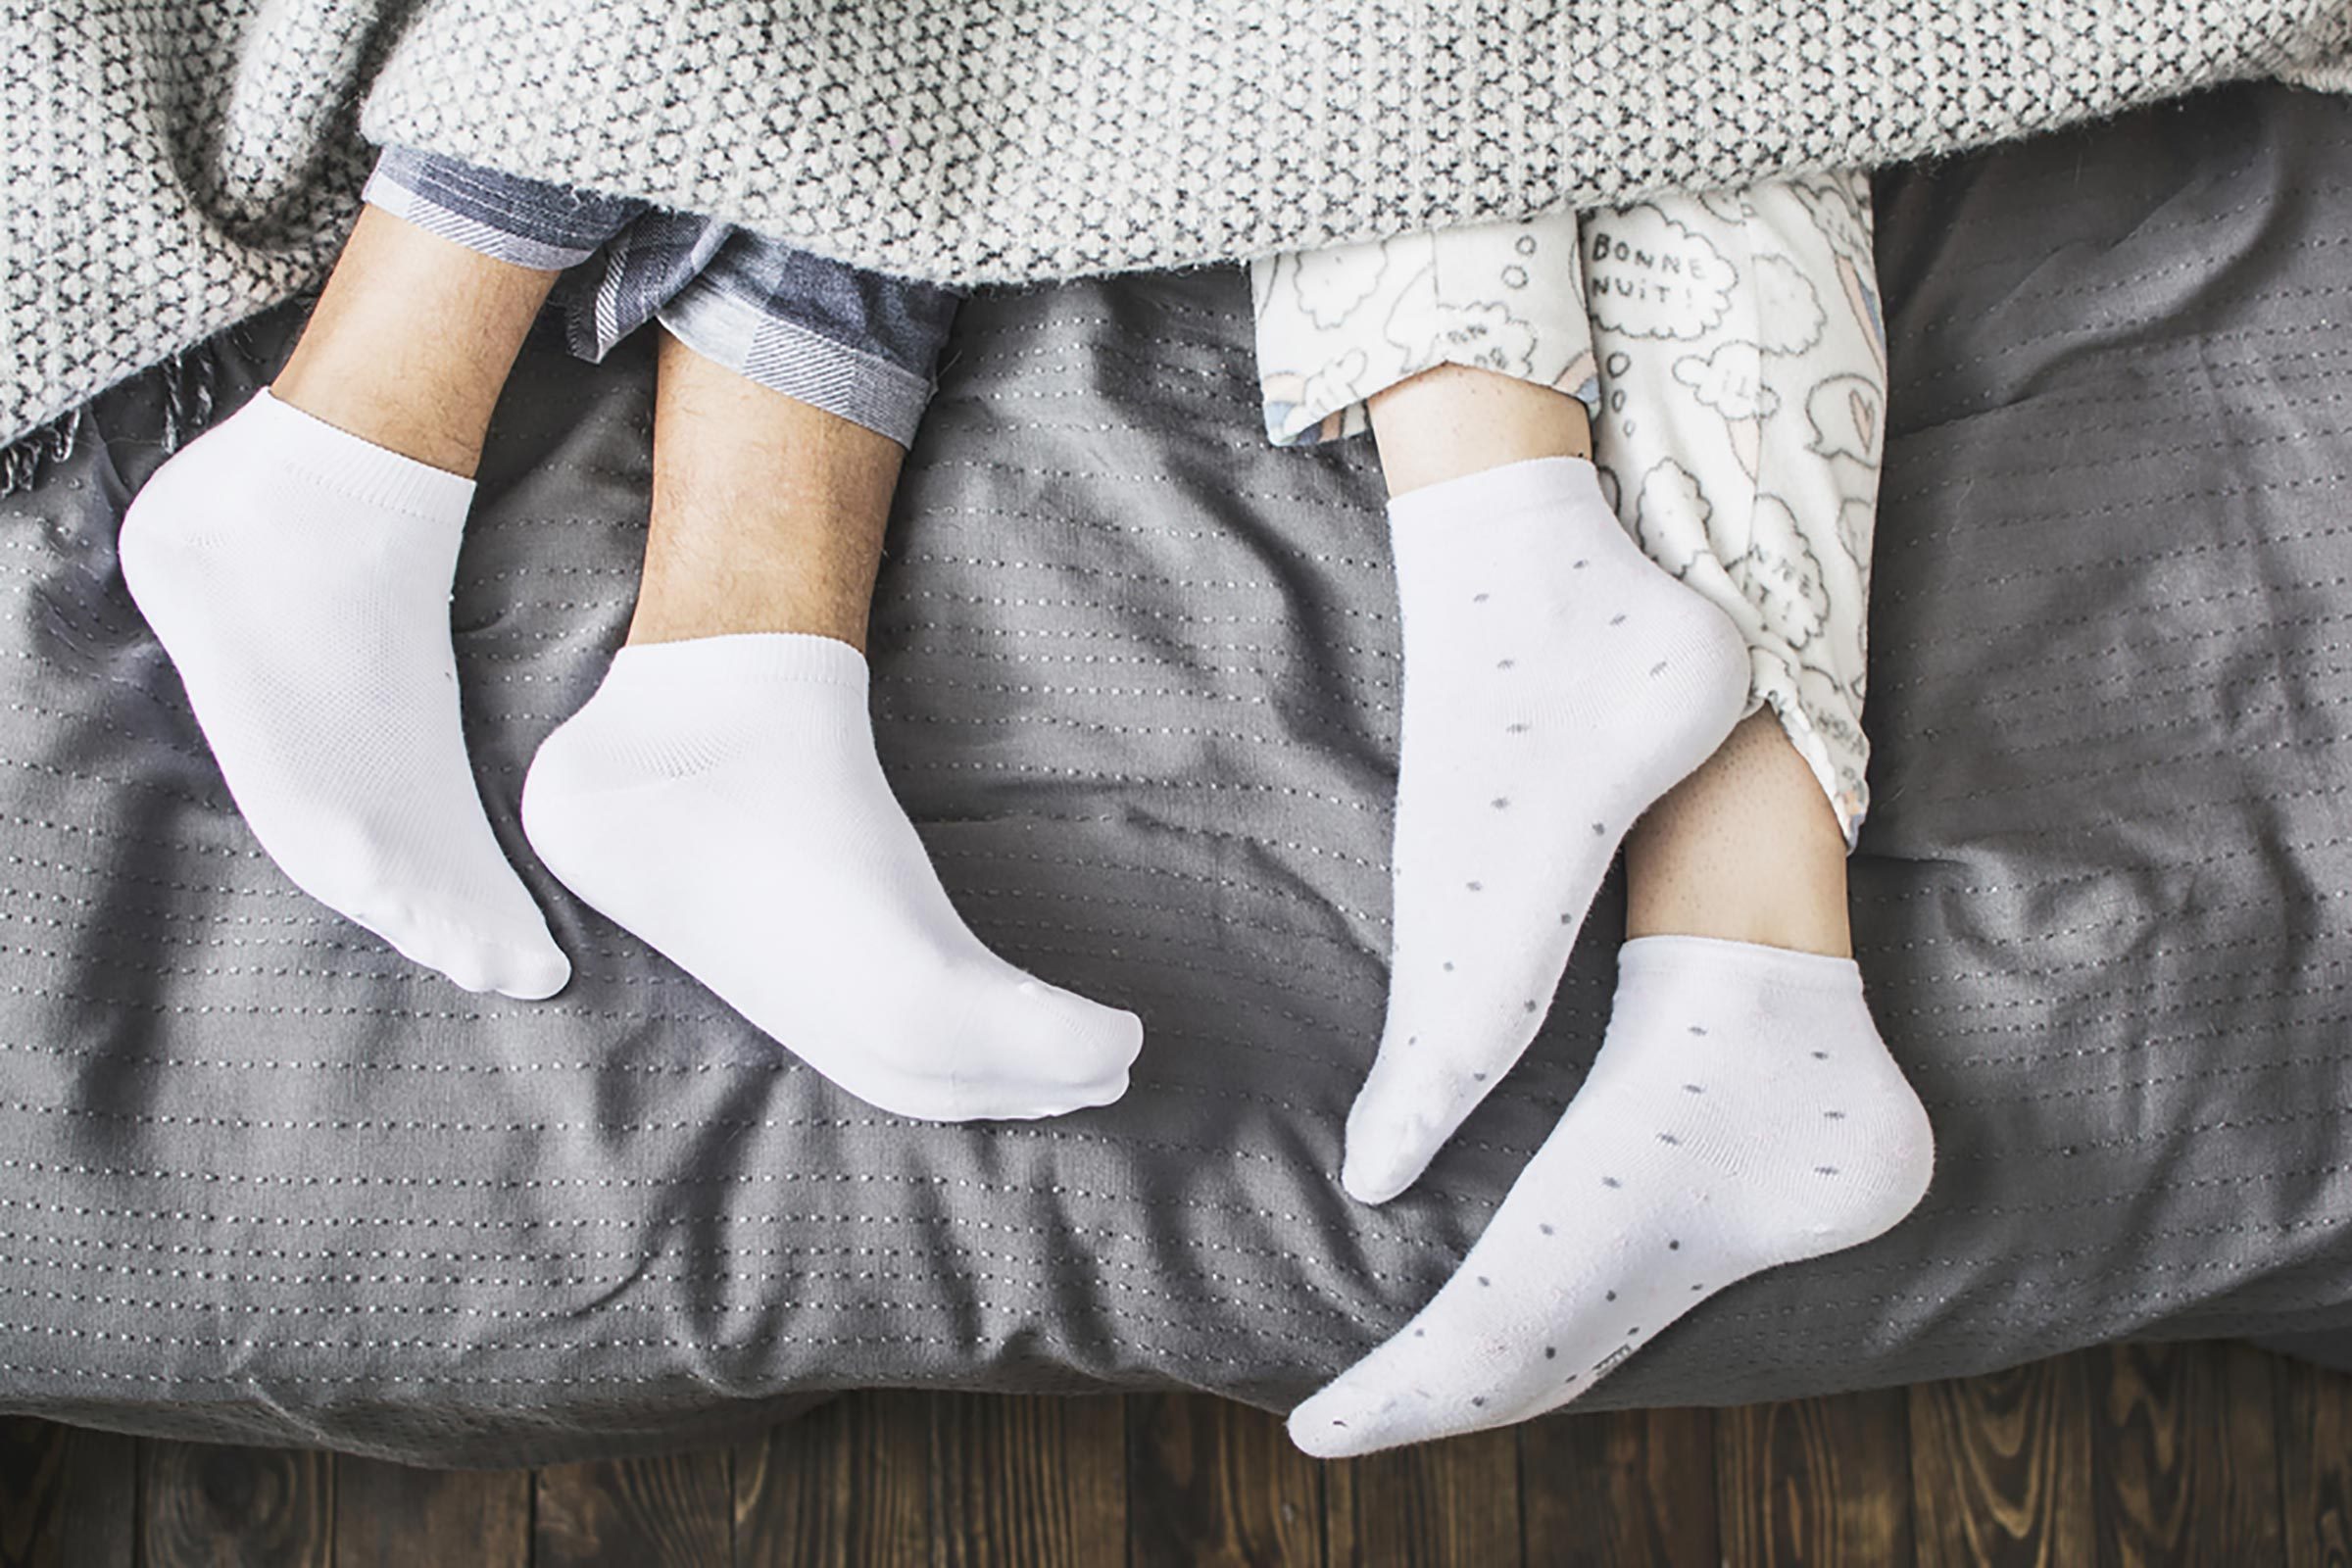 https://www.thehealthy.com/wp-content/uploads/2017/09/Heres-Why-You-Should-Be-Wearing-Socks-to-Bed_548620681-Anna-Kolosiuk.jpg